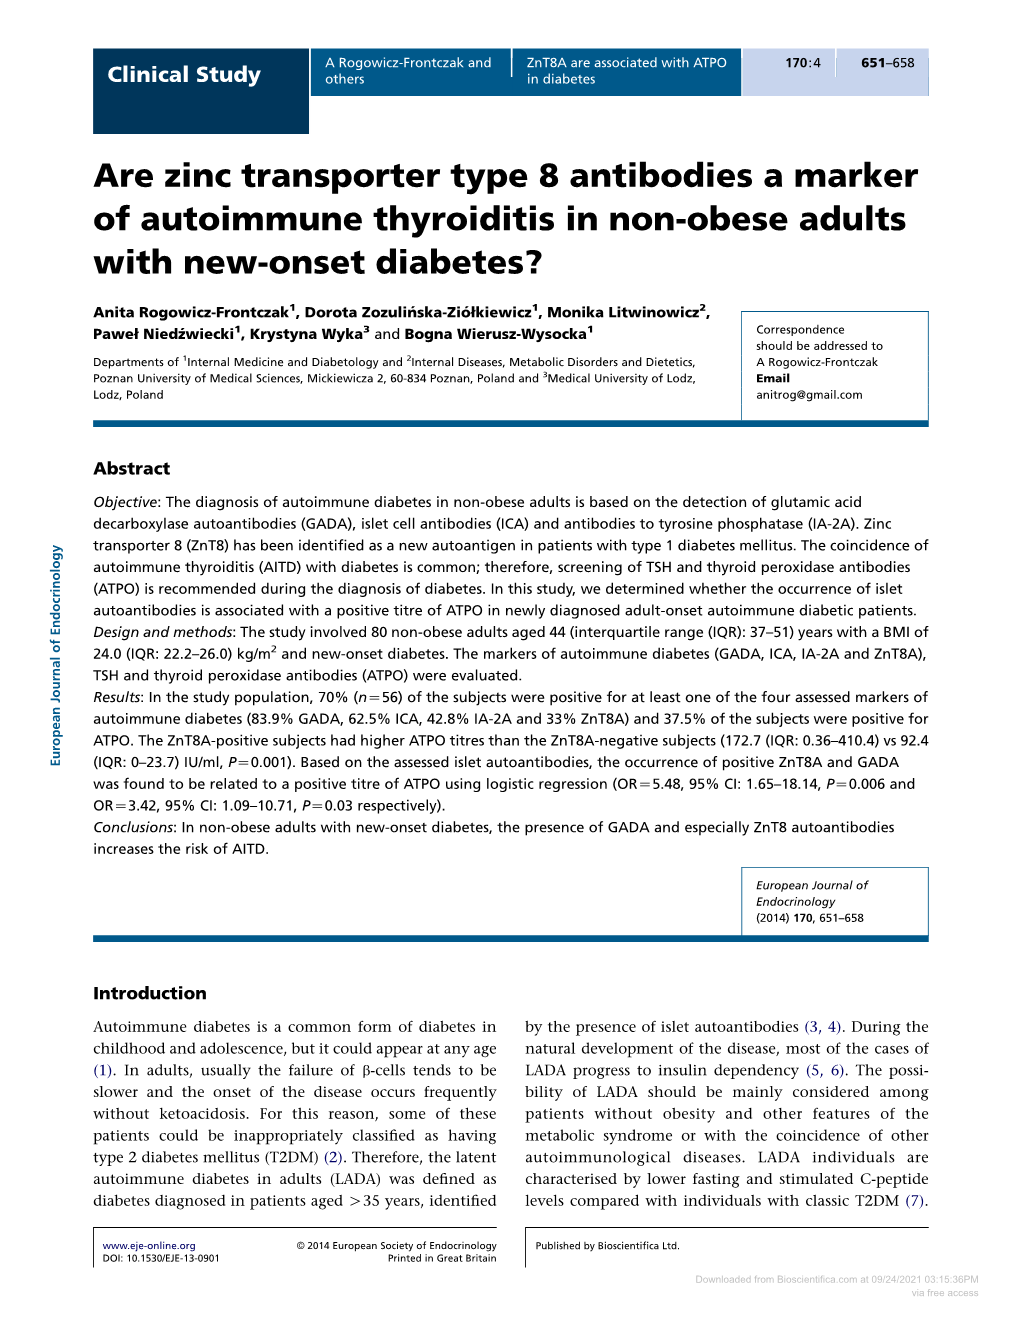 Are Zinc Transporter Type 8 Antibodies a Marker of Autoimmune Thyroiditis in Non-Obese Adults with New-Onset Diabetes?